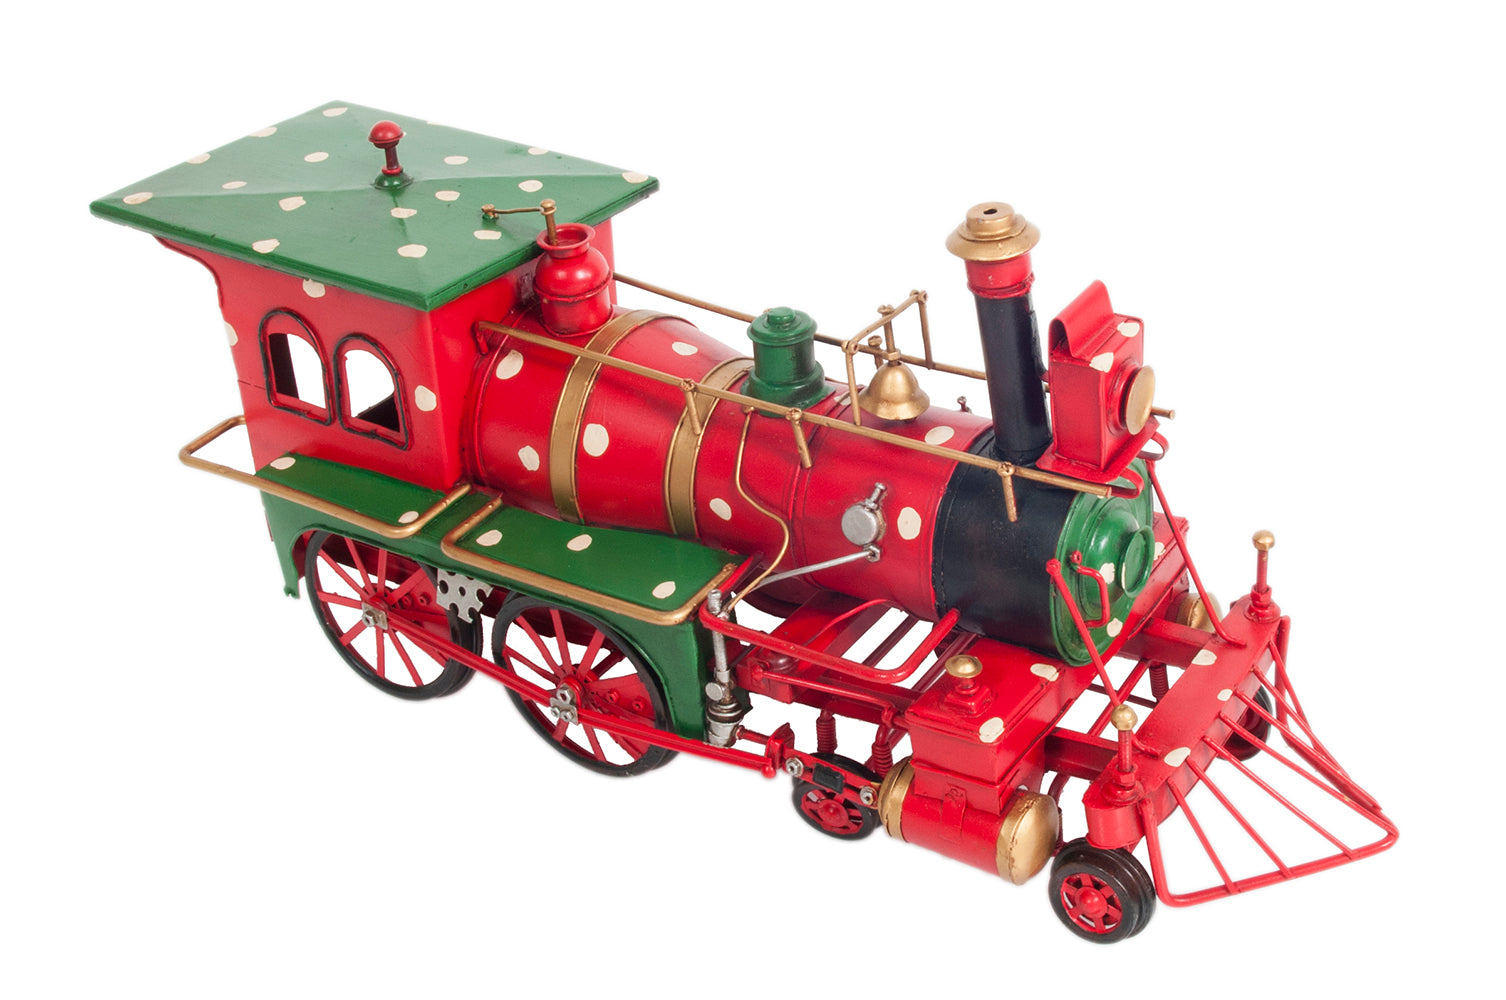 ALDO Toys & Games L: 27.5 W: 6 H: 8.5 Inches / new / metal Christmass Train Handmade Metal Assembled